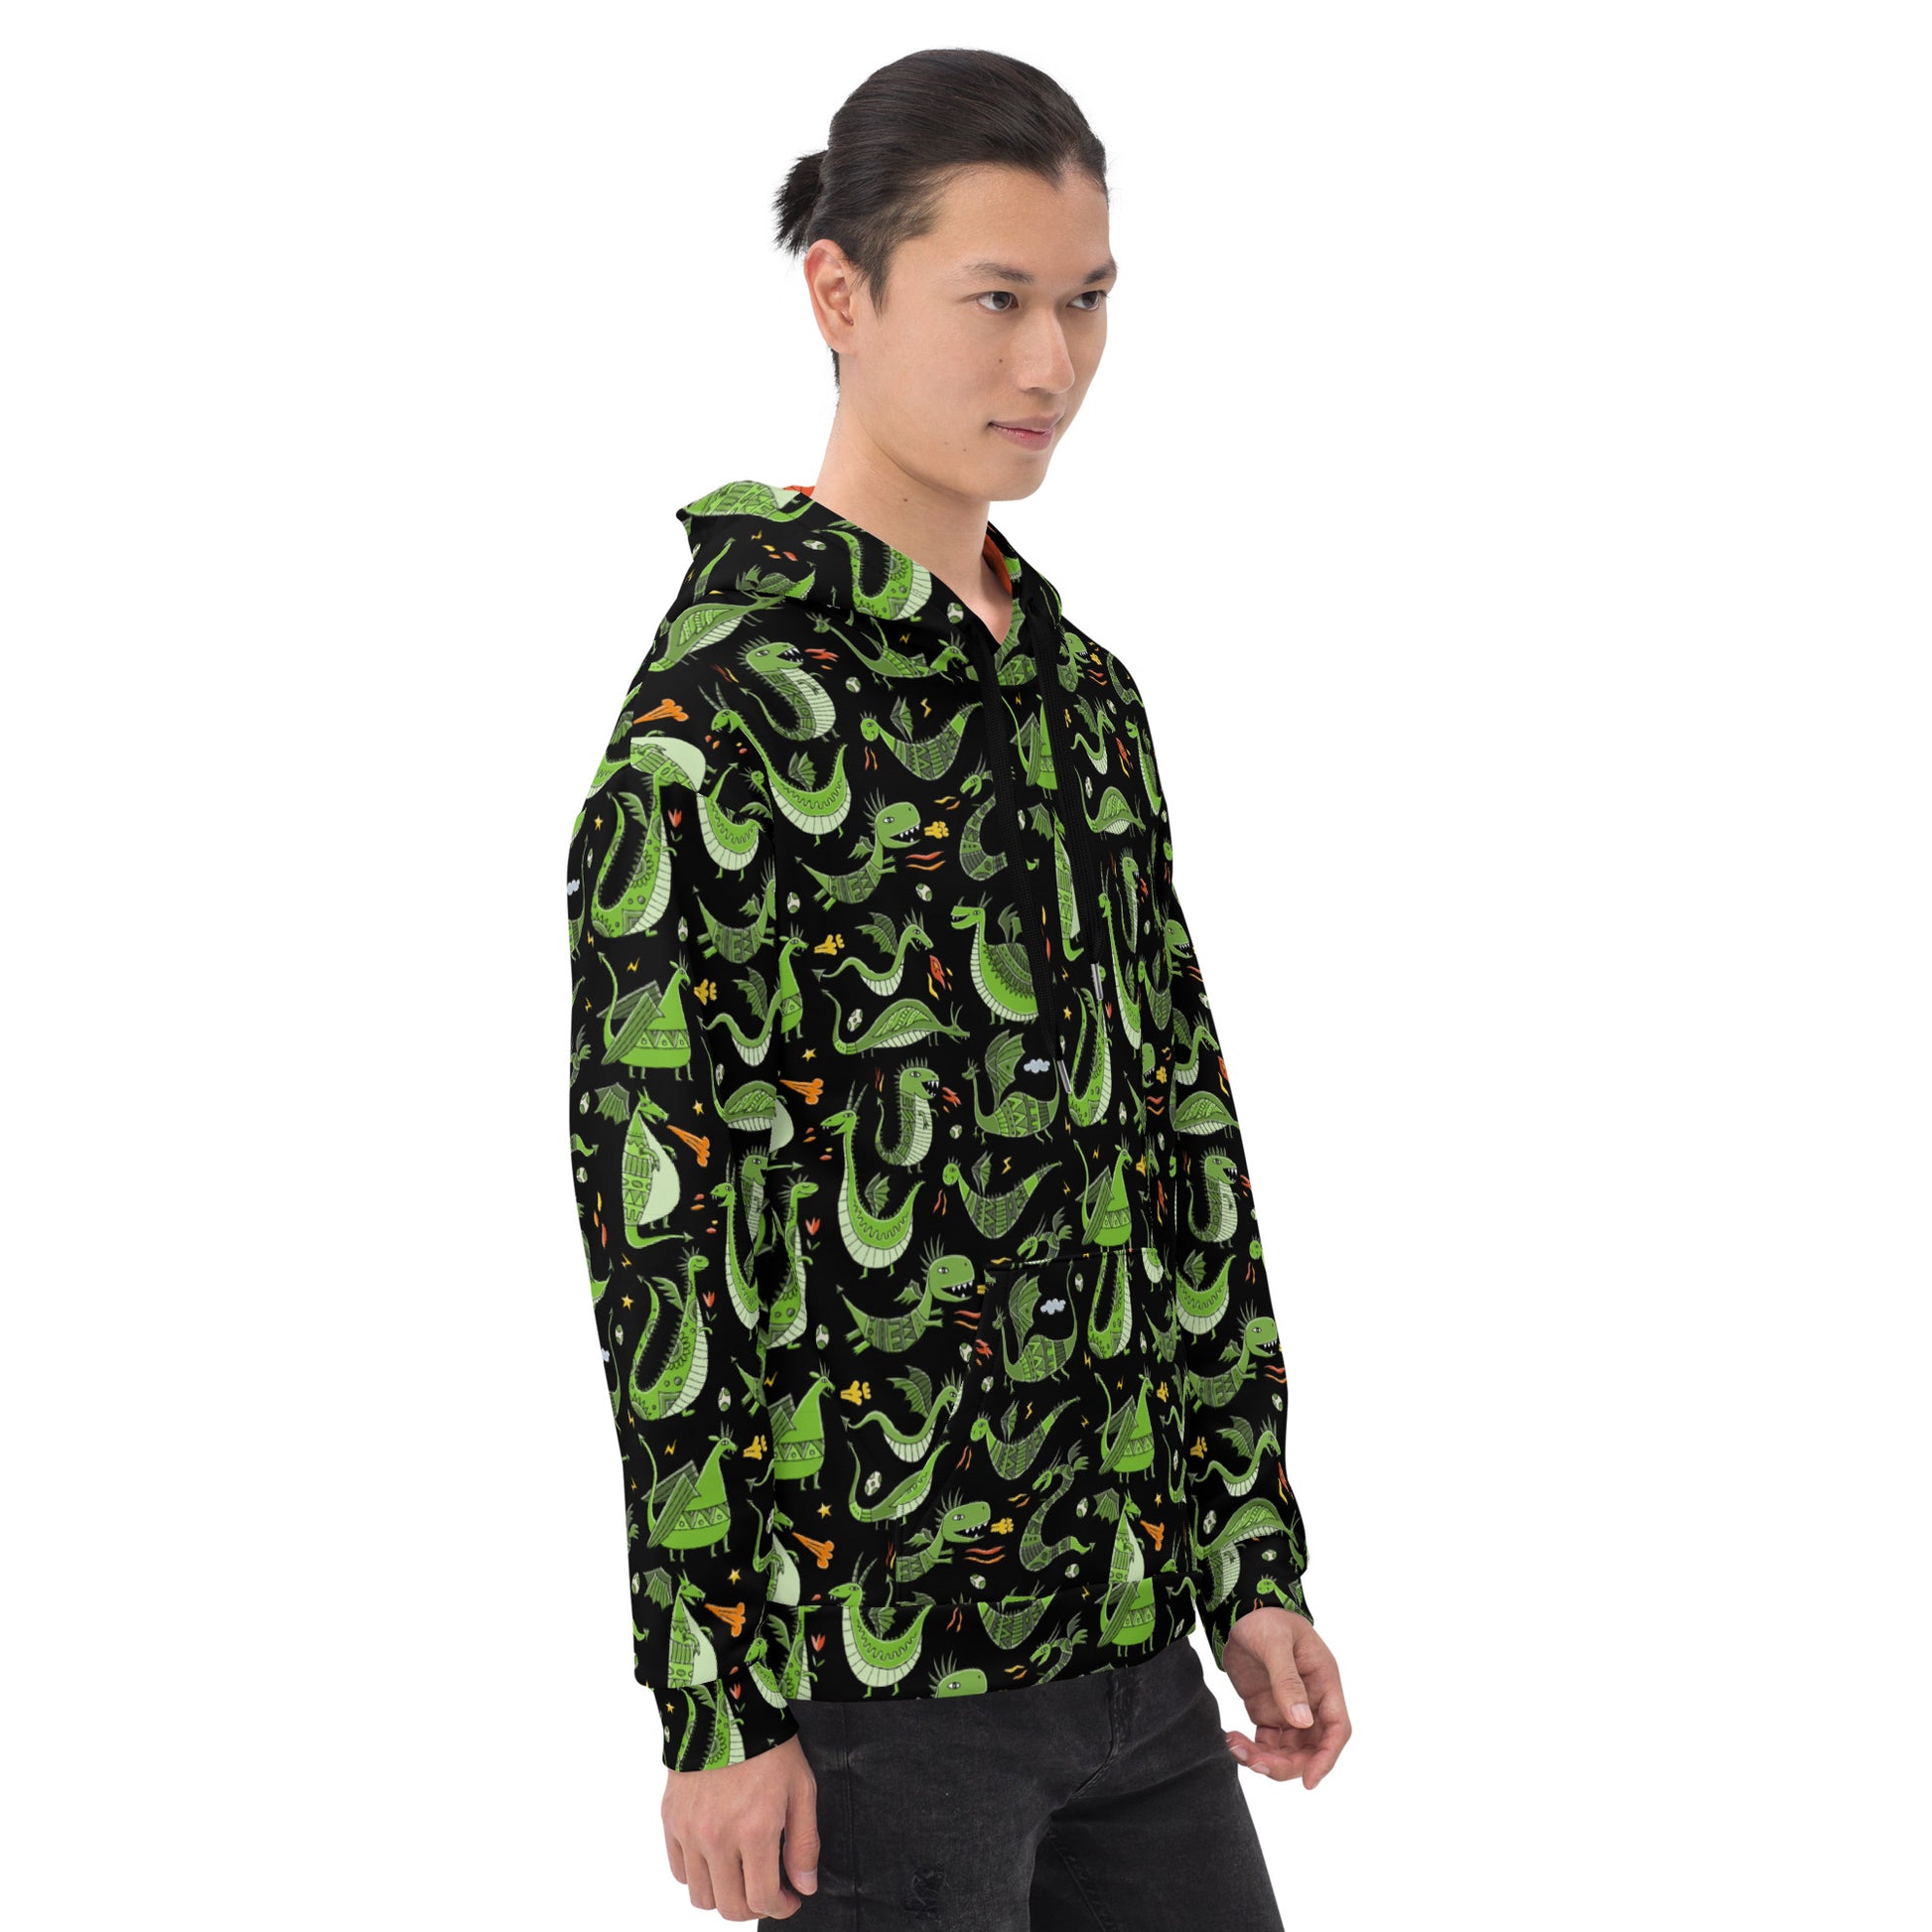 Men wearing in All over print Hoodie Unisex black color and red hood with Funny Green Dragons designer print - symbol of 2024